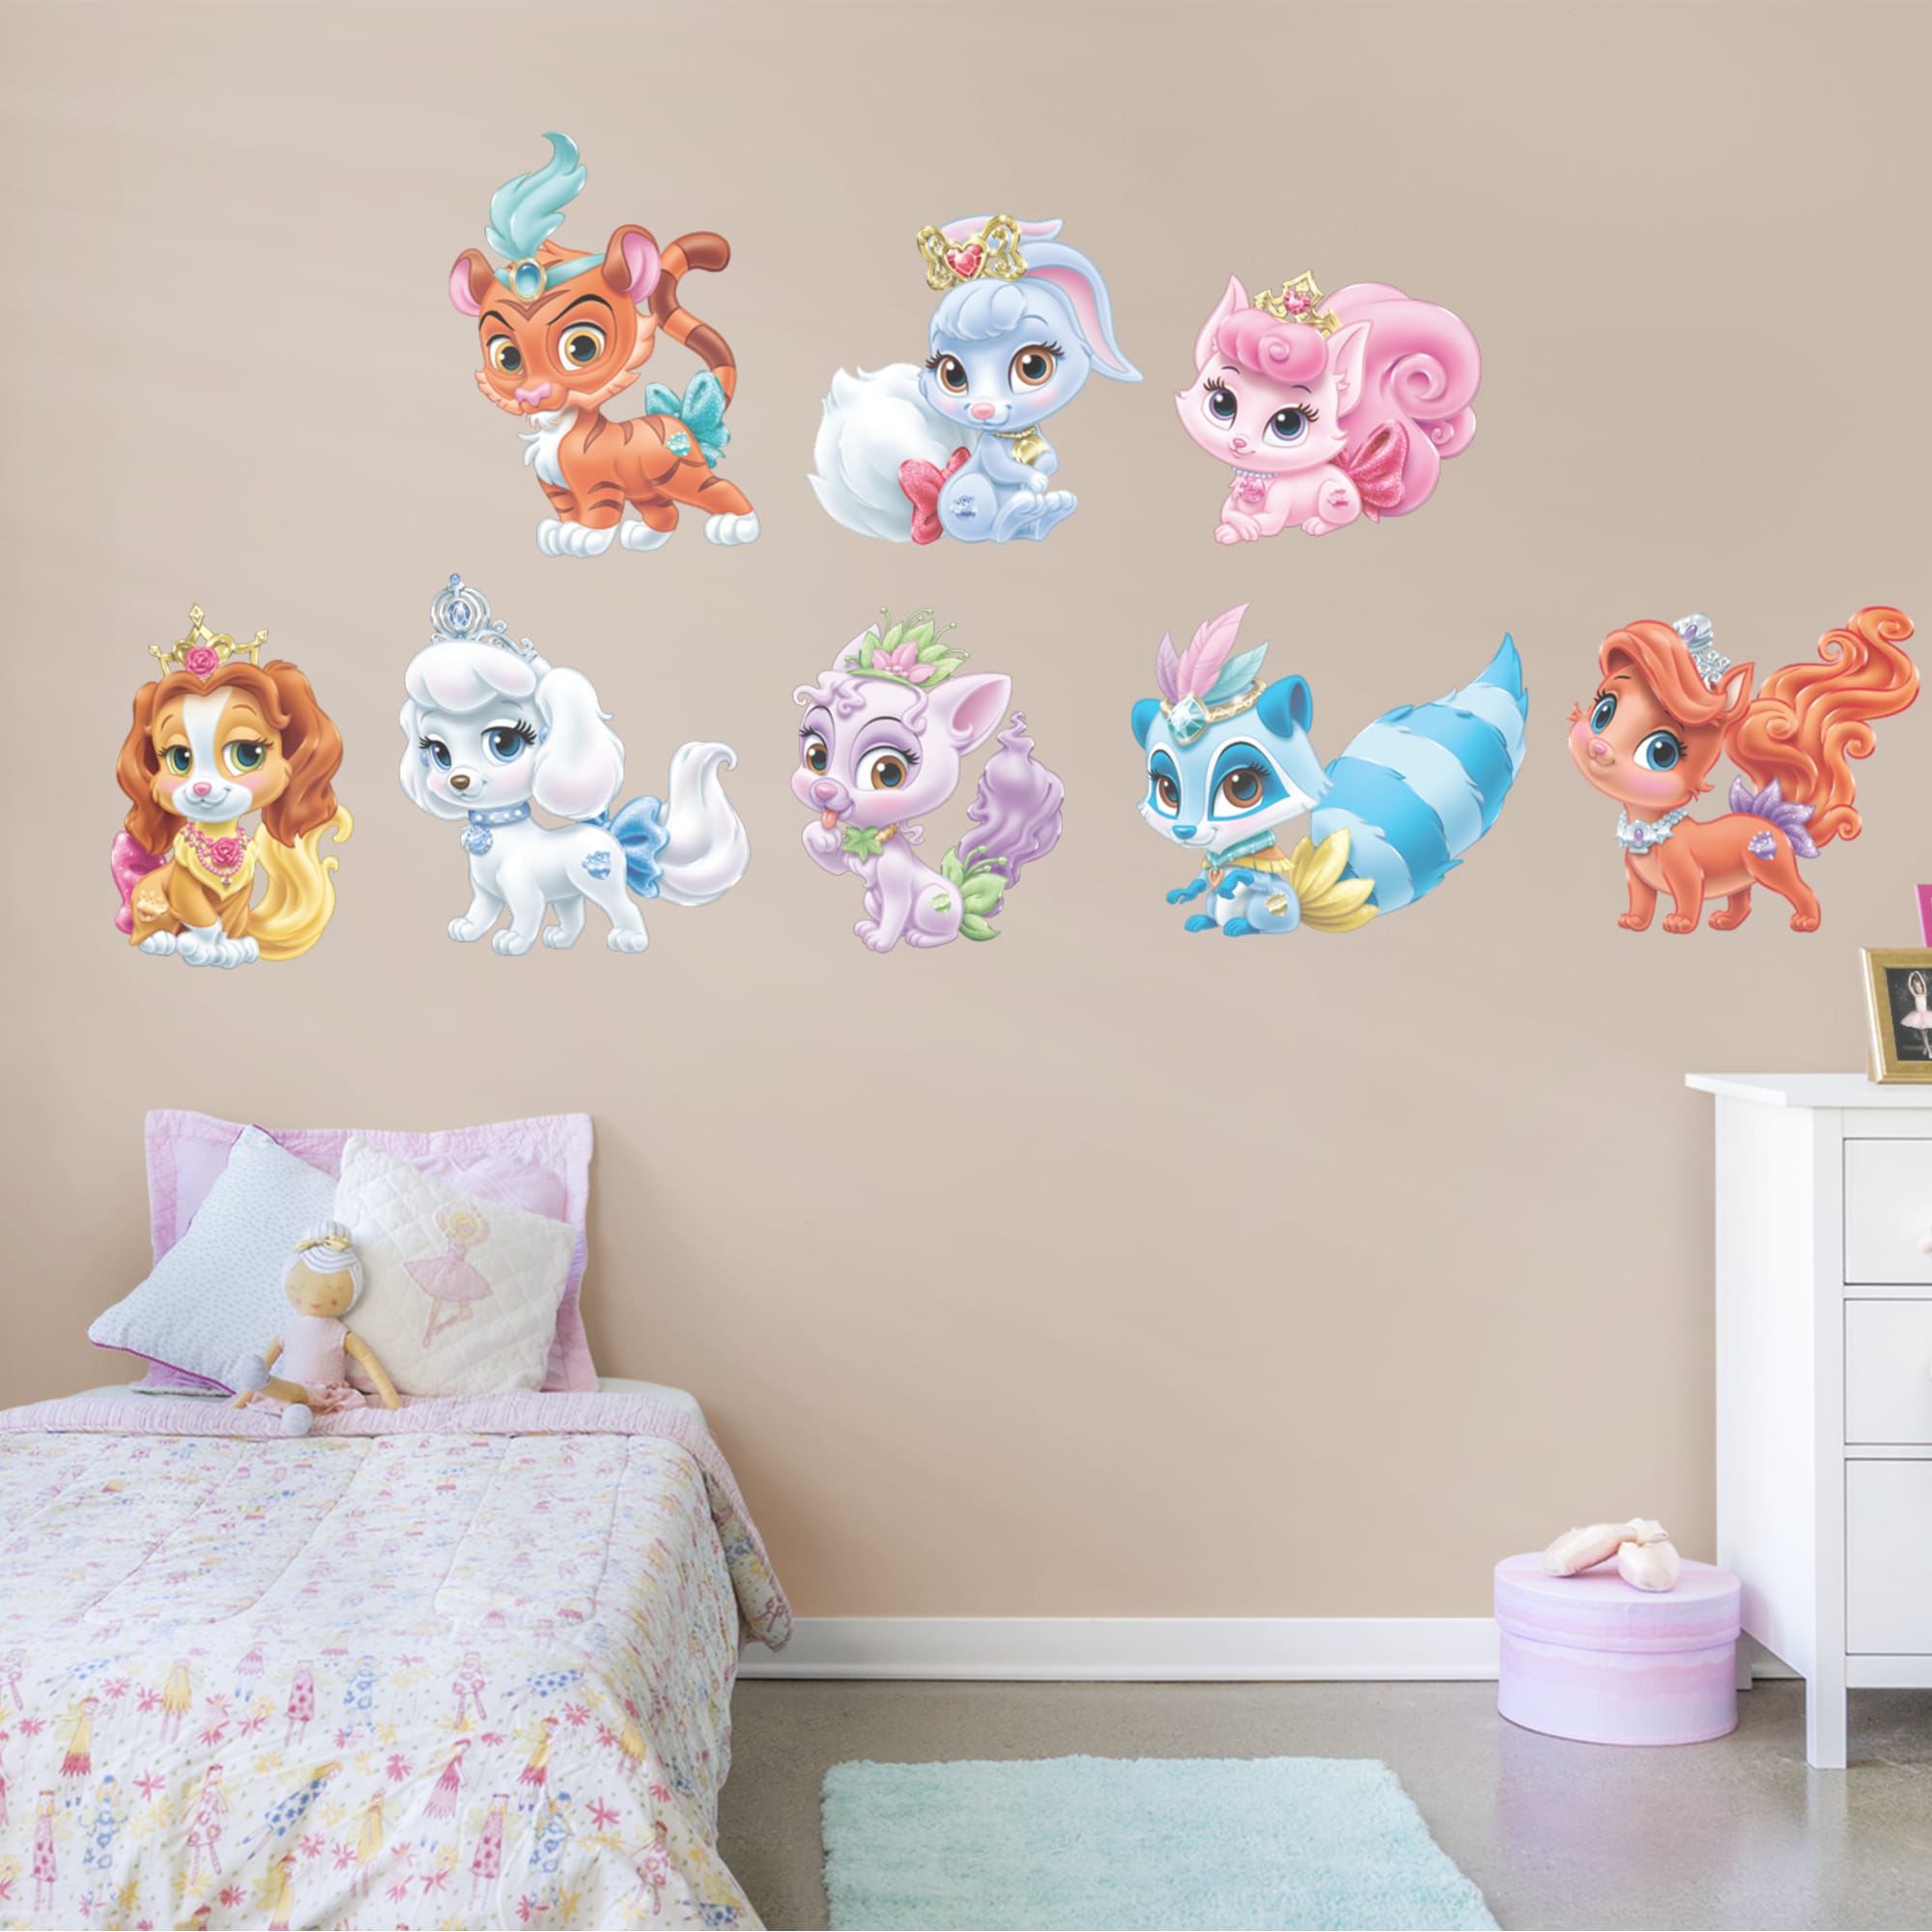 Palace Pets: Collection - Officially Licensed Disney Removable Wall Decals 79.0"W x 52.0"H by Fathead | Vinyl